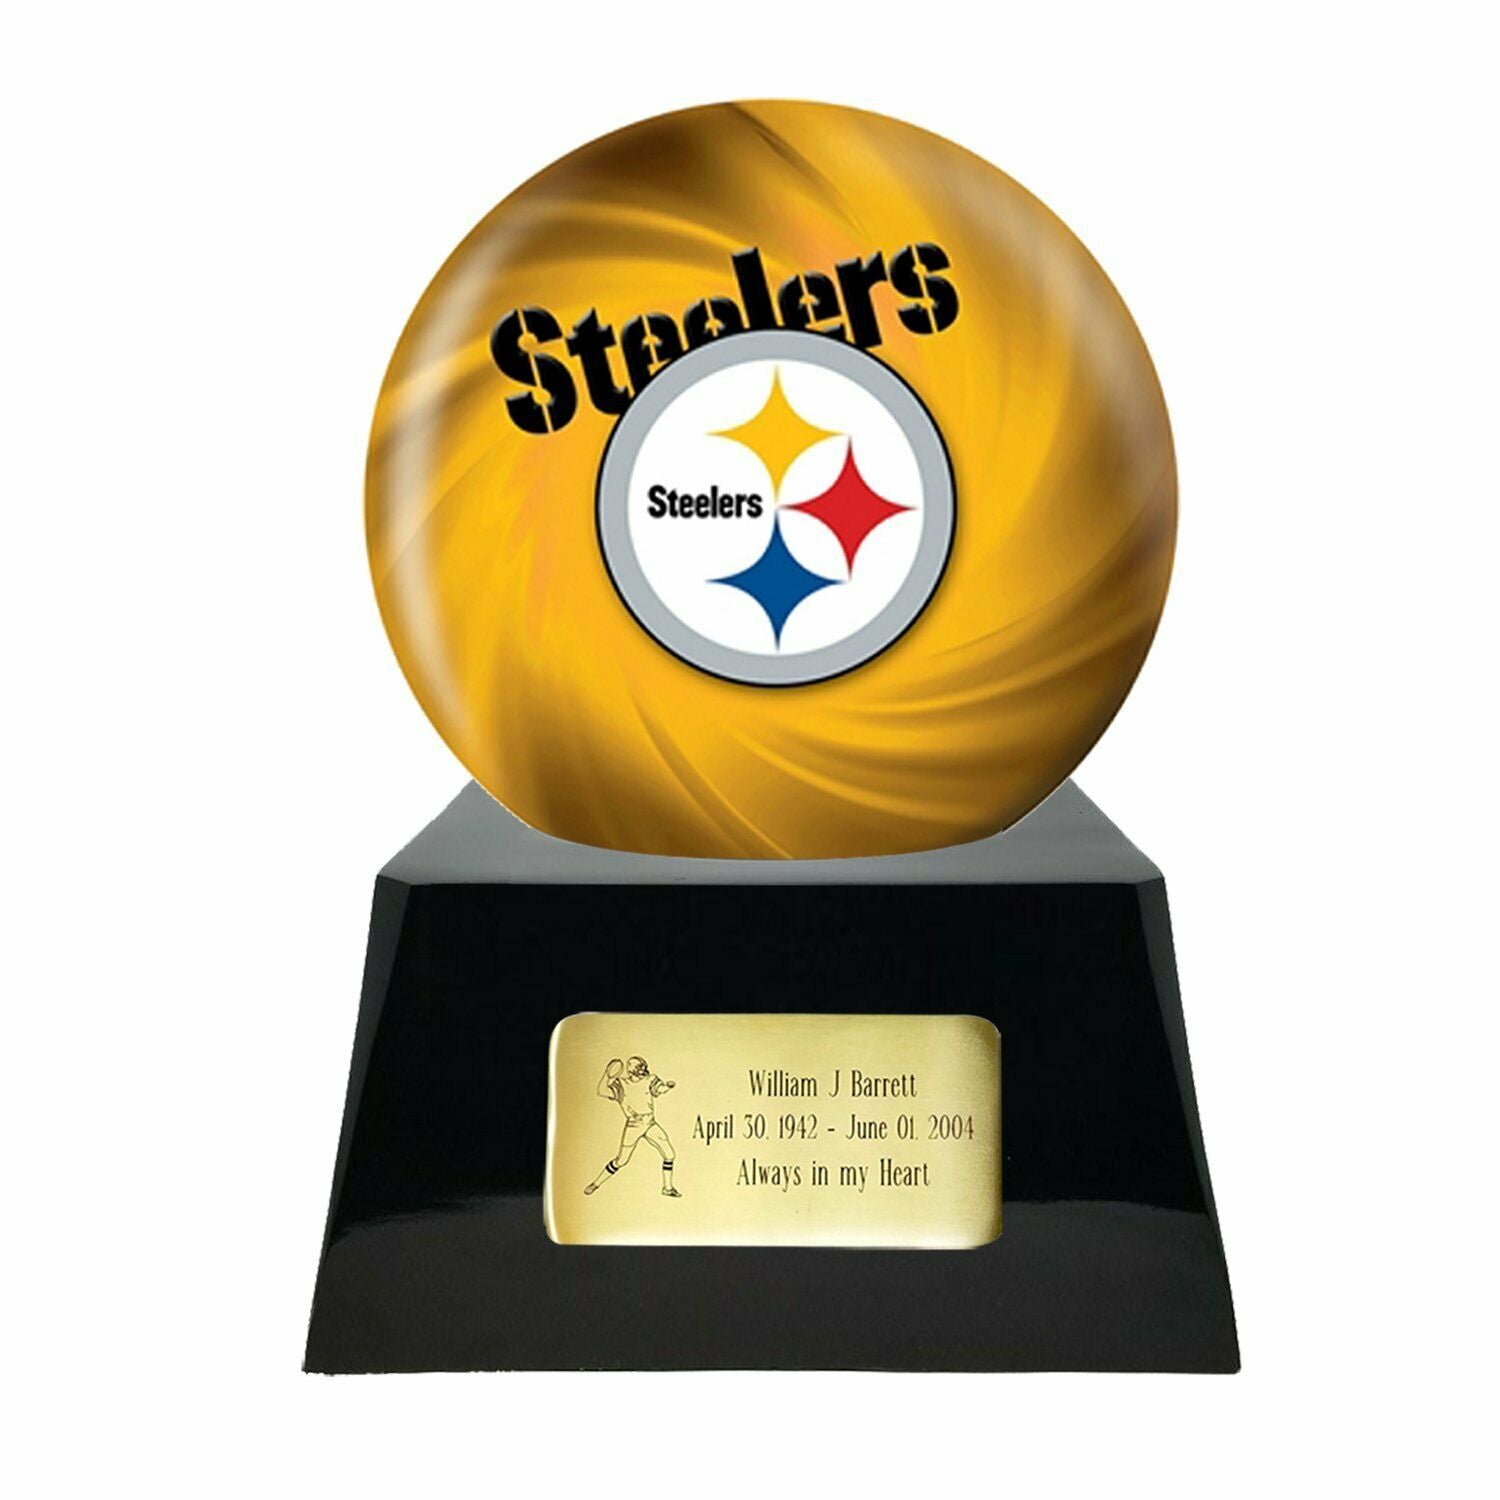 200+] Pittsburgh Steelers Pictures